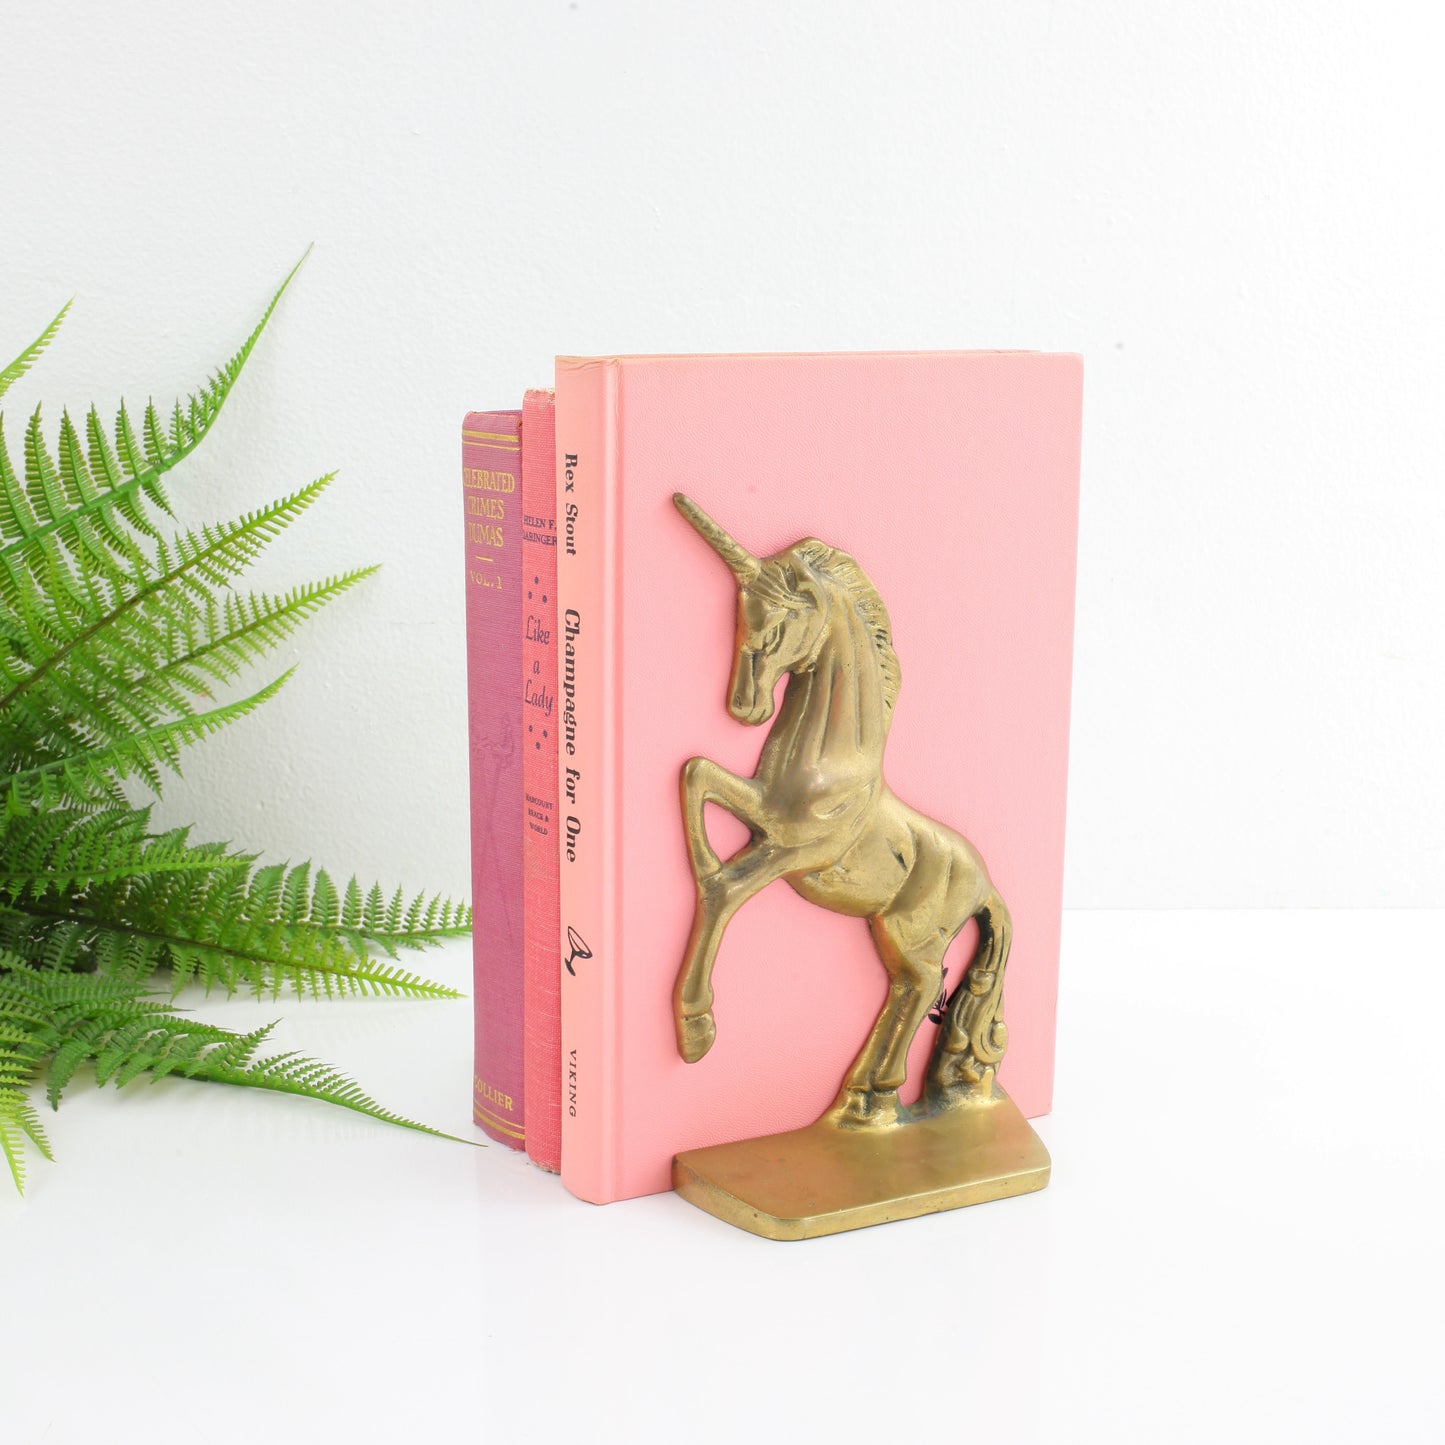 SOLD - Vintage Brass Unicorn Bookends